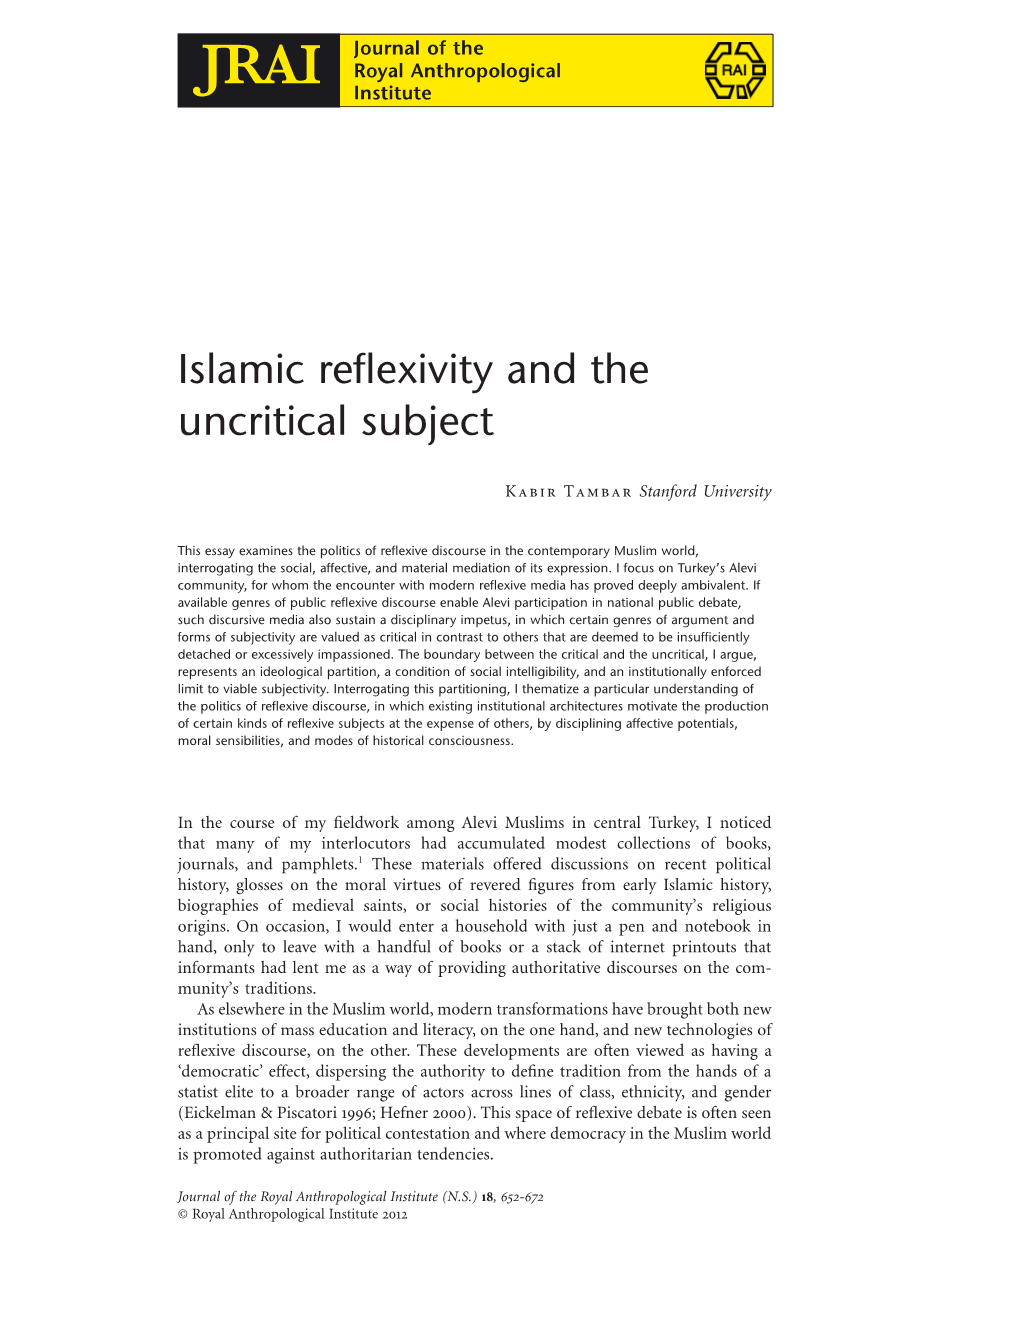 Islamic Reflexivity and the Uncritical Subject 653